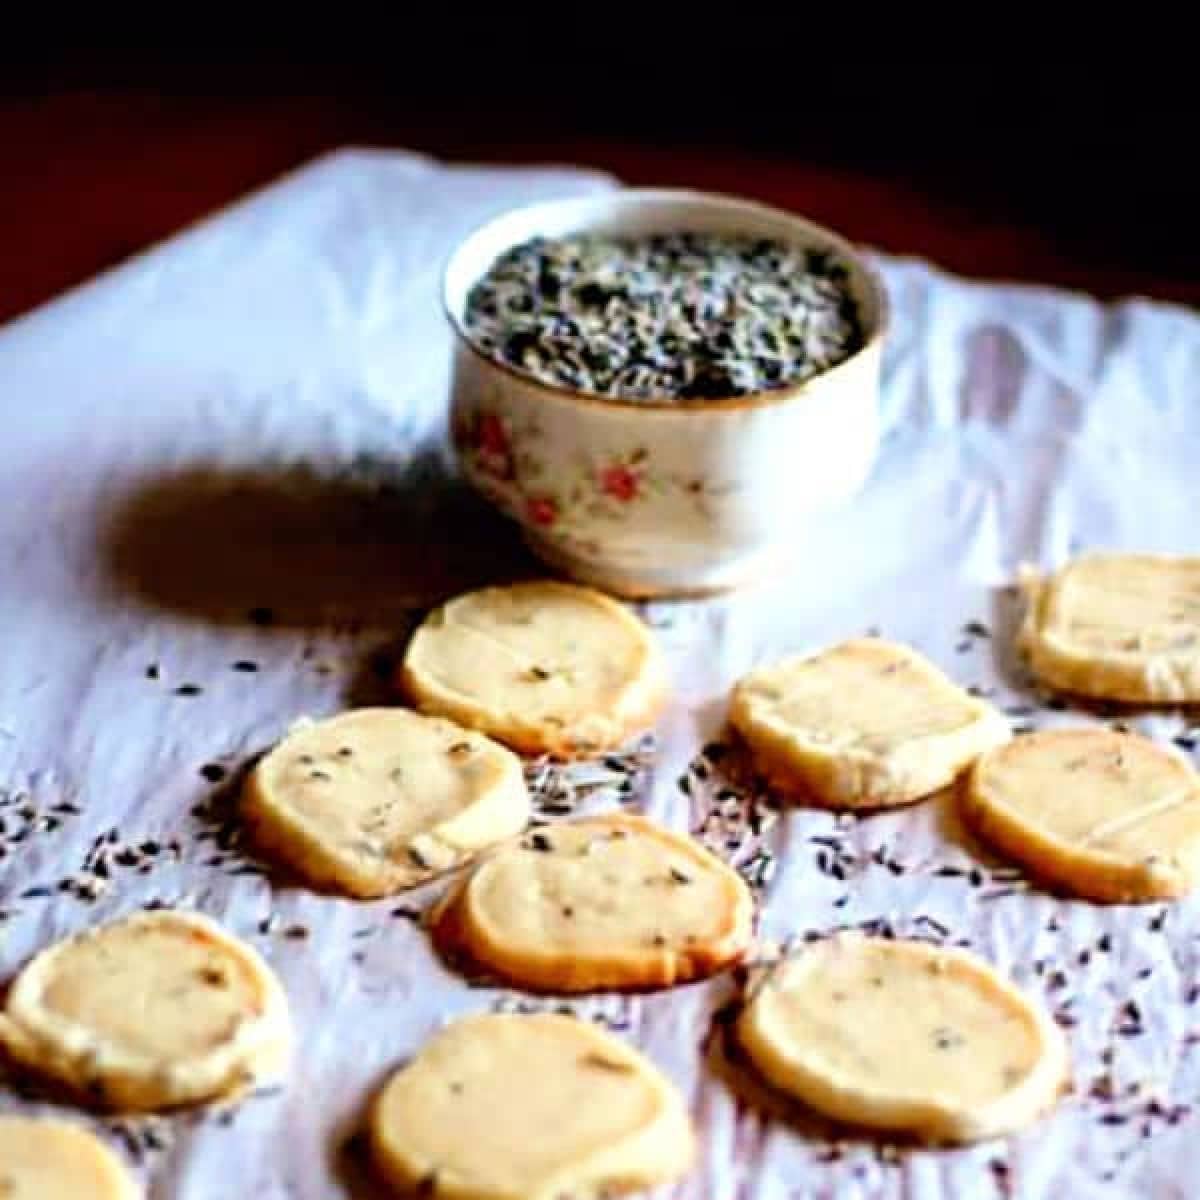 Baked cookies on a piece of parchment with dried lavender flowers.